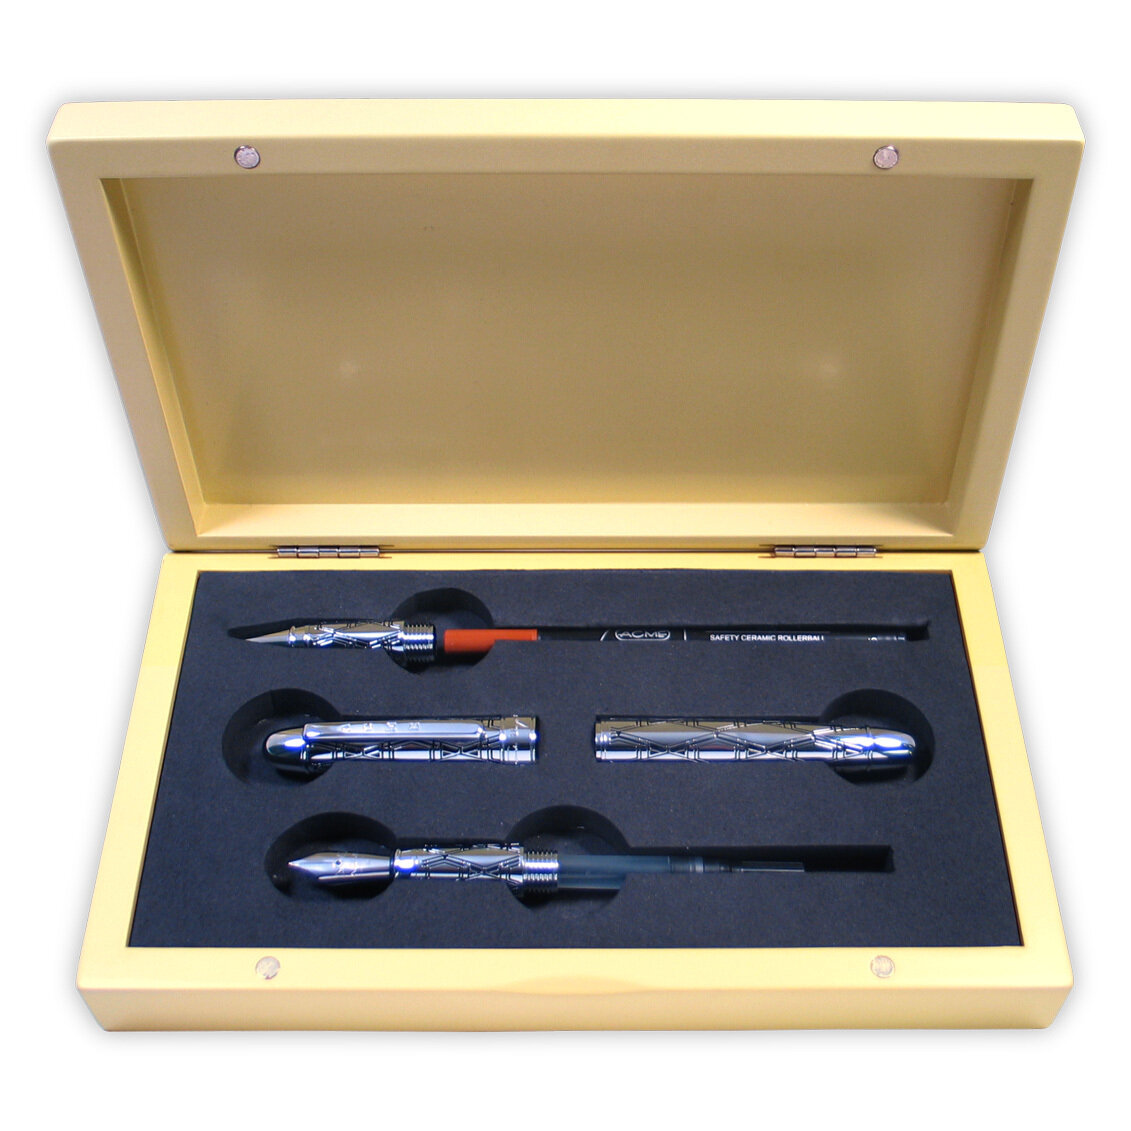 ACME Taliesin Anniversary Limited Edition Etched Pen Set By Frank Lloyd Wright